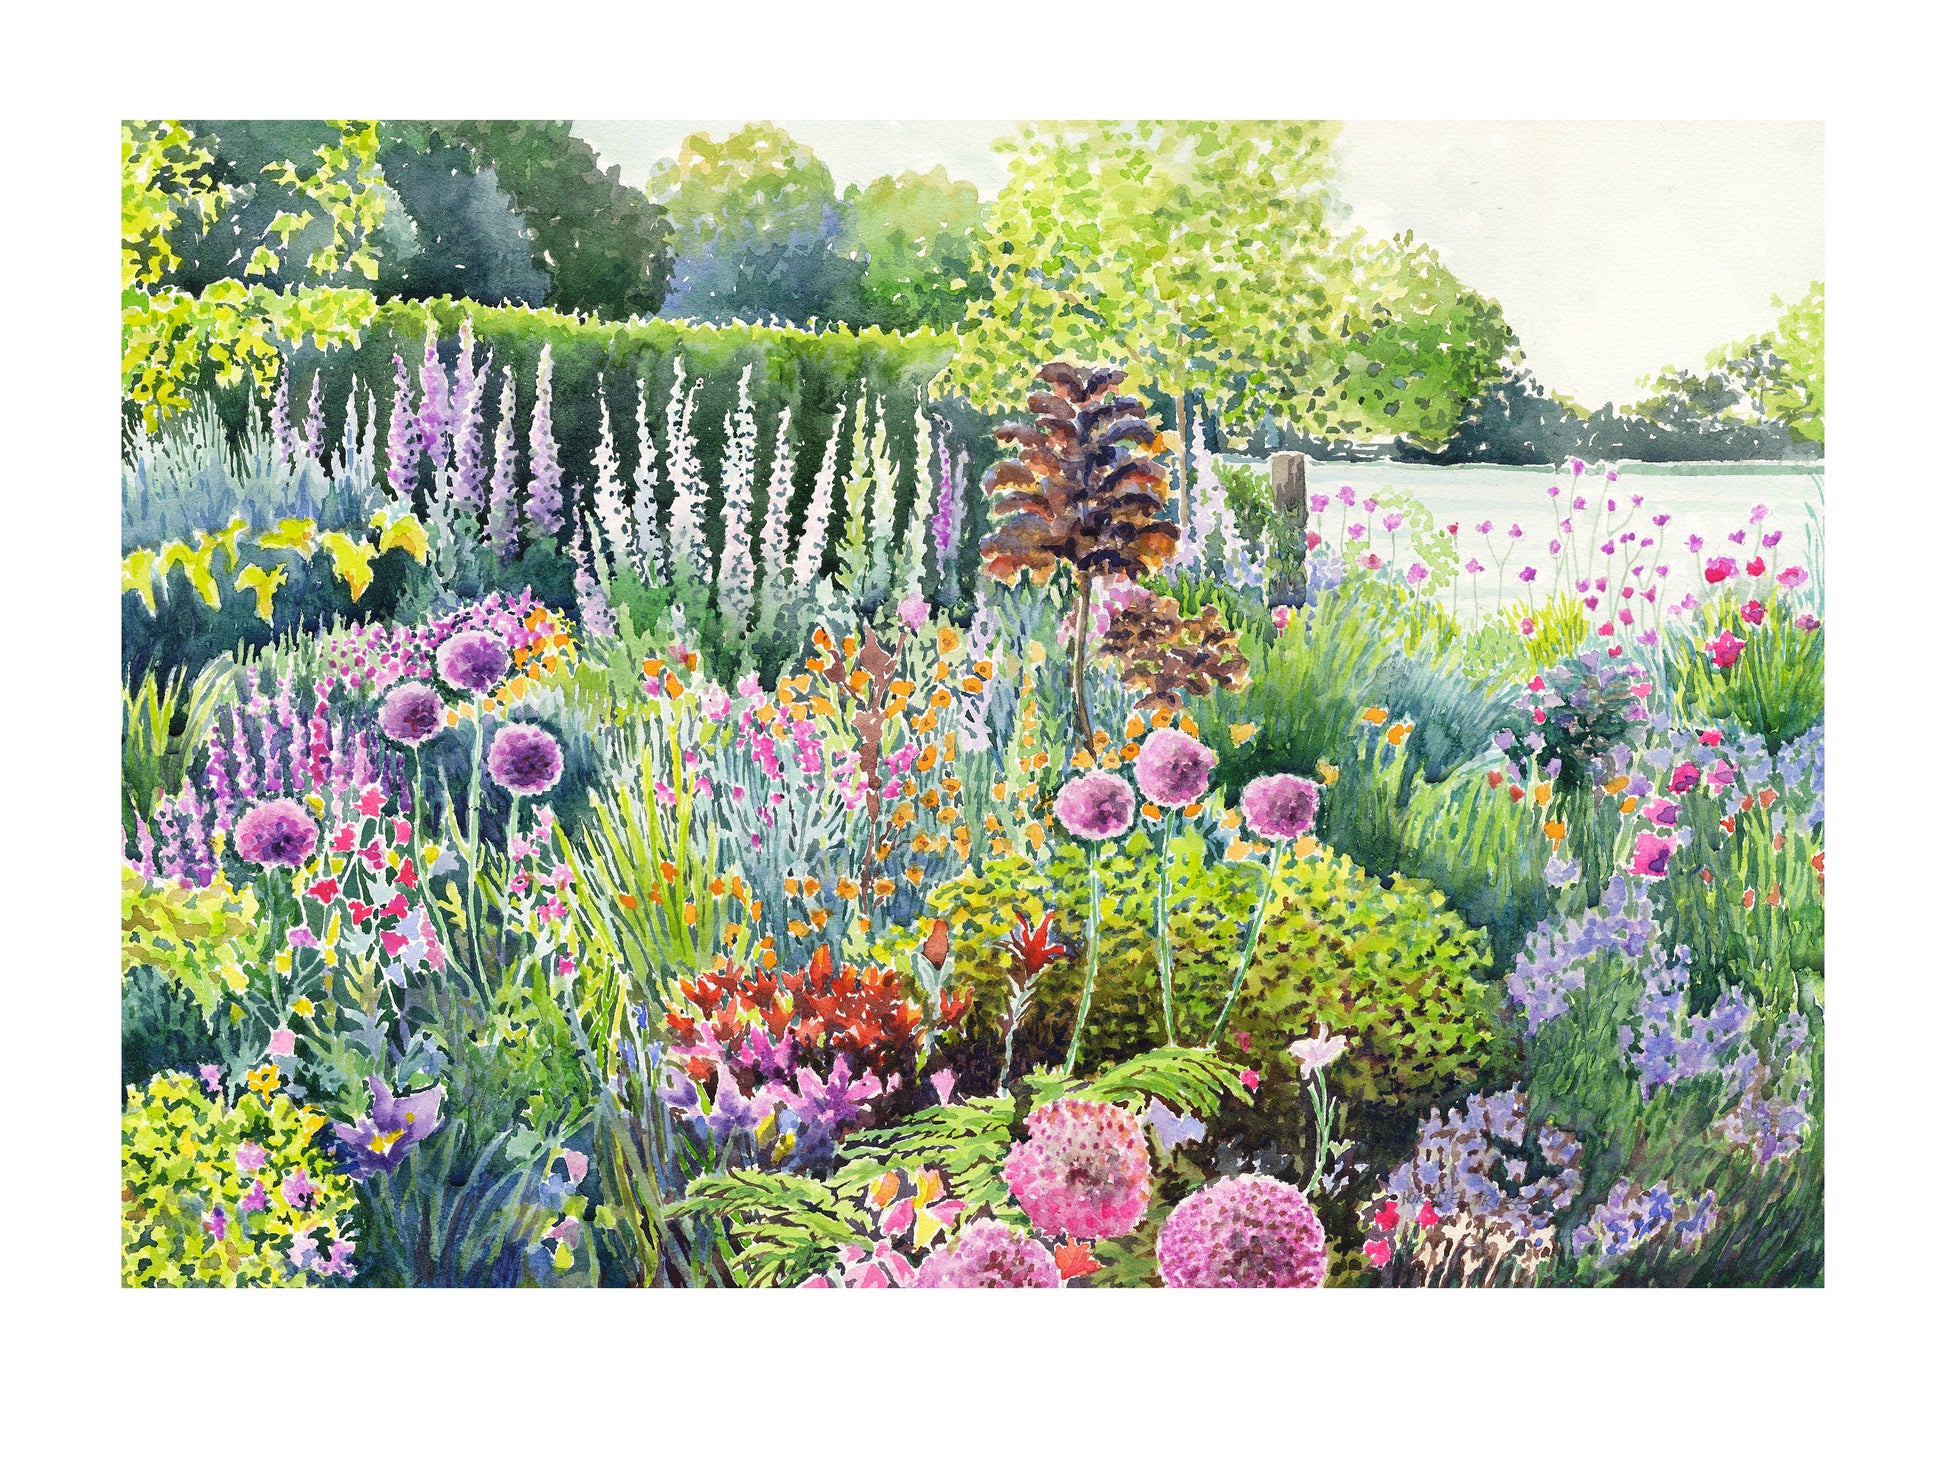 Colourful Spring Summer garden landscape watercolour painting with flowers and plants in foreground and field behind